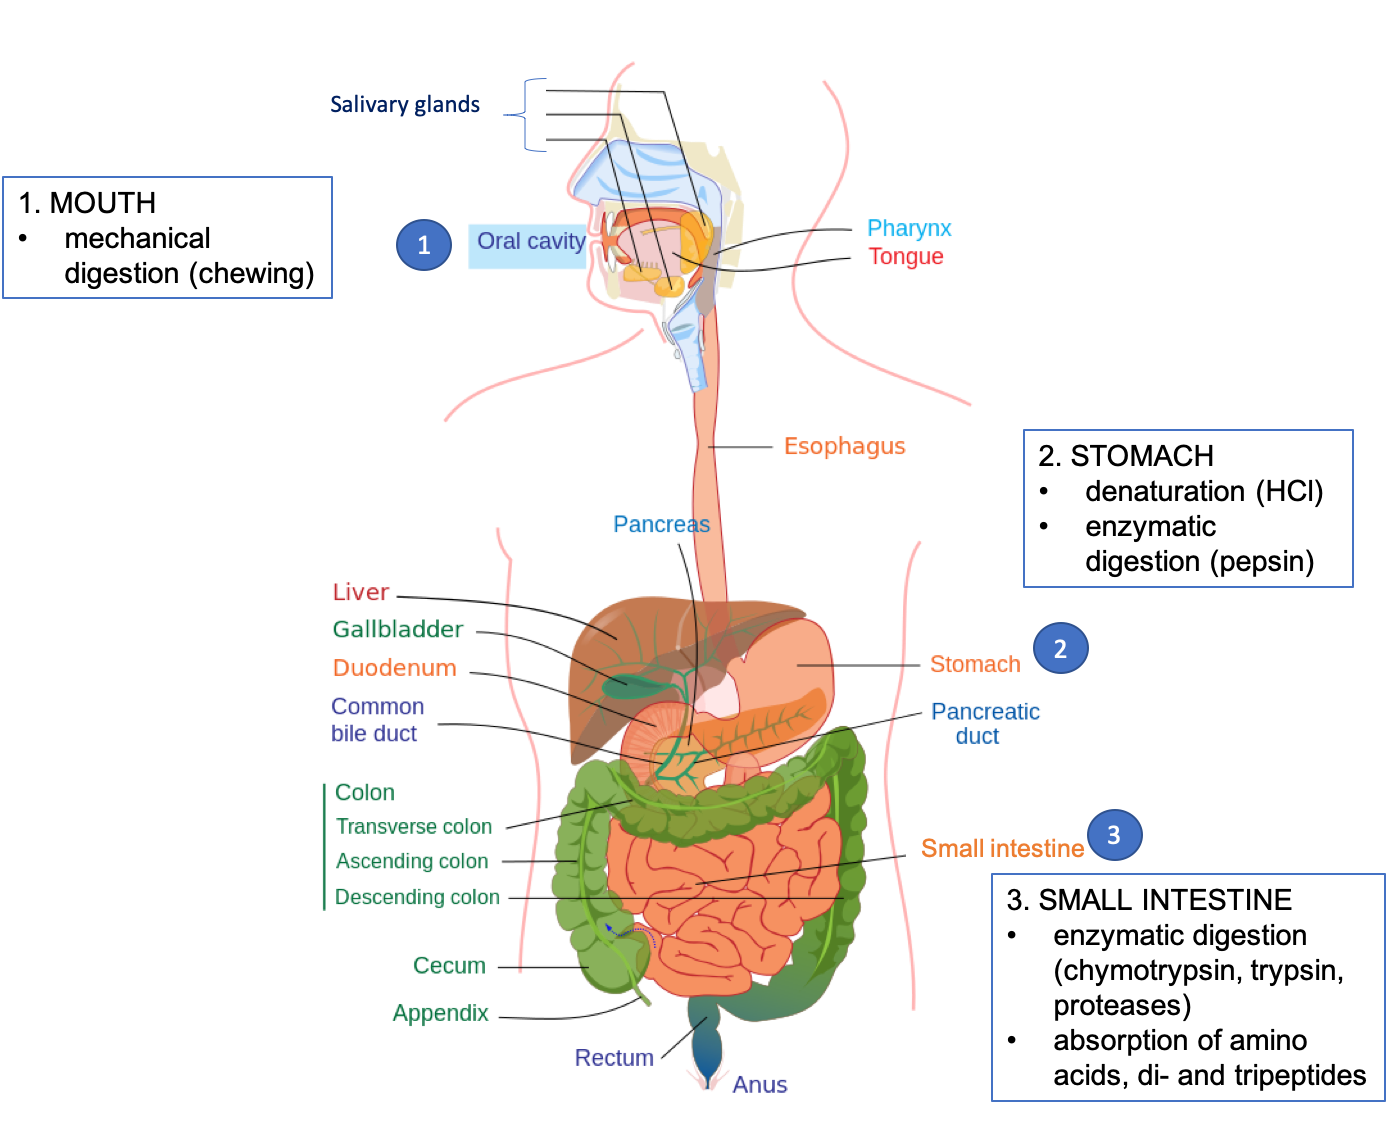 The figure shows a drawing of the digestive system, with organs labeled. Major sites of digestion of protein are highlighted, including mouth (mechanical digestion, chewing), stomach (denaturation by HCl and enzymatic digestion by pepsin), and small intestine (enzymatic digestion by chymotrypsin, trypsin, and proteases, and absorption of amino acids and di and tripeptides).